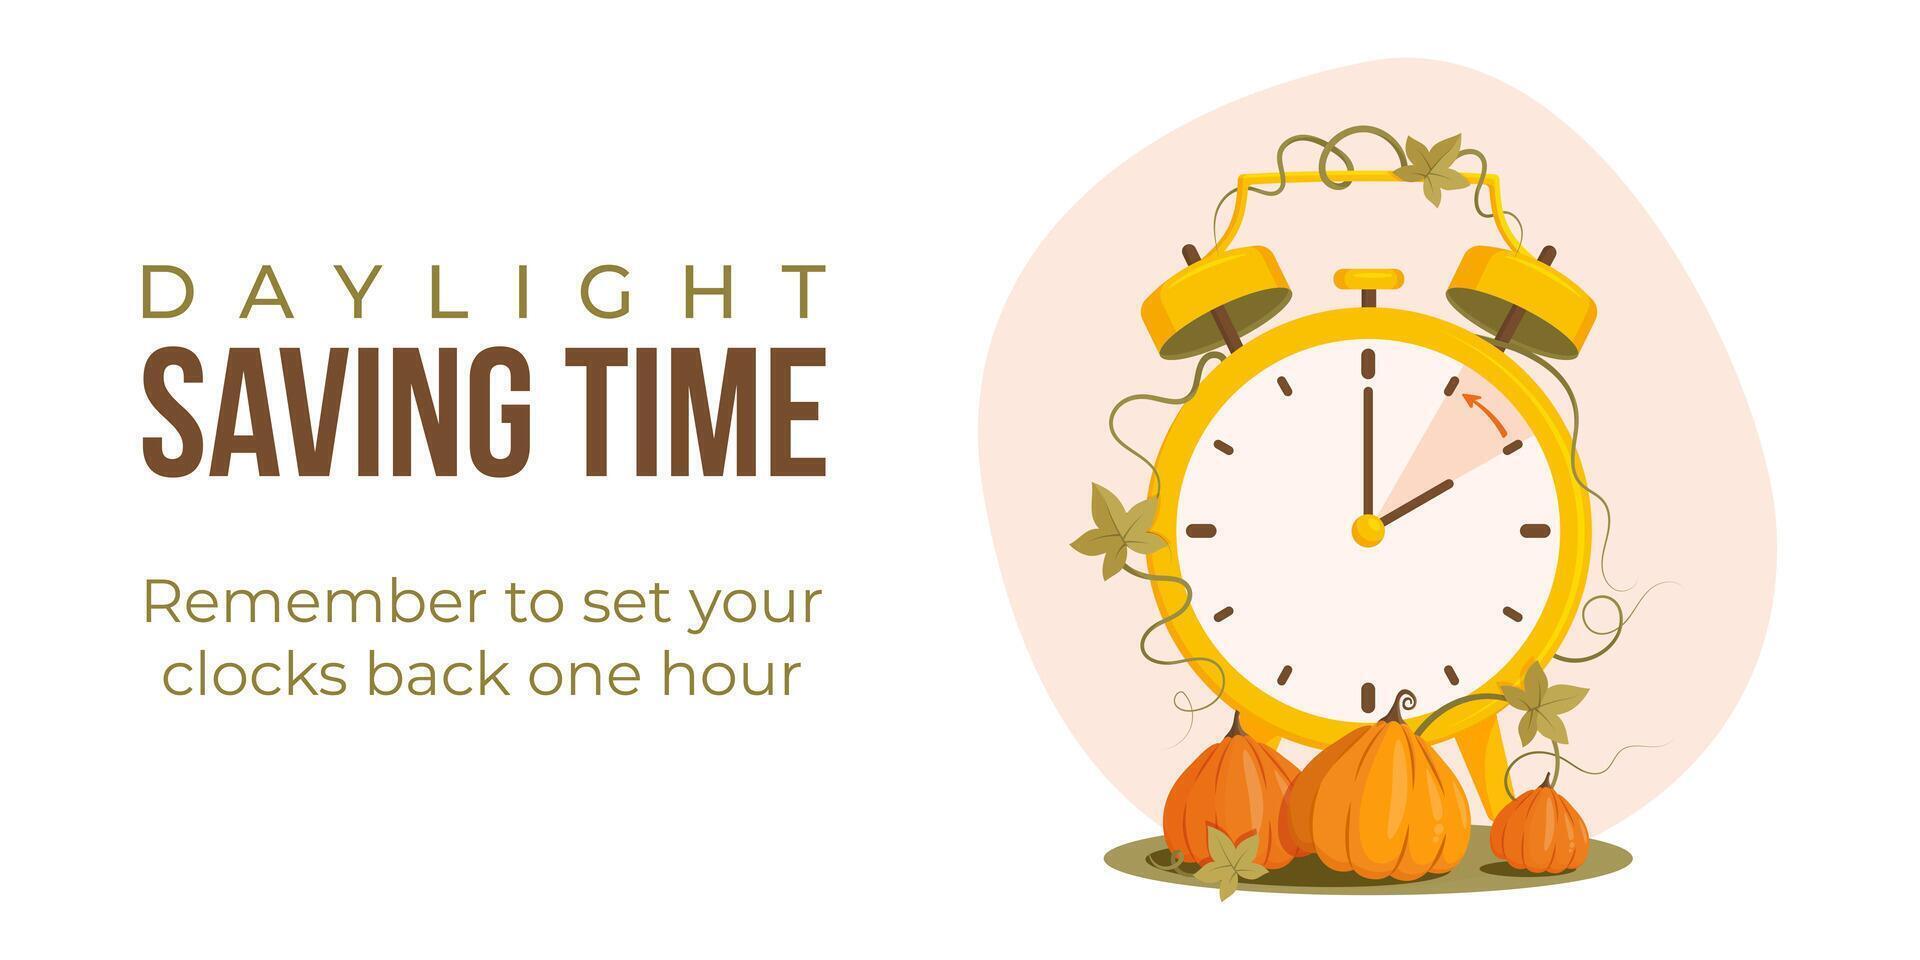 Daylight saving time end concept banner, poster. Fall back time. Clock with pumpkin, time changing to wintertime vector illustration.